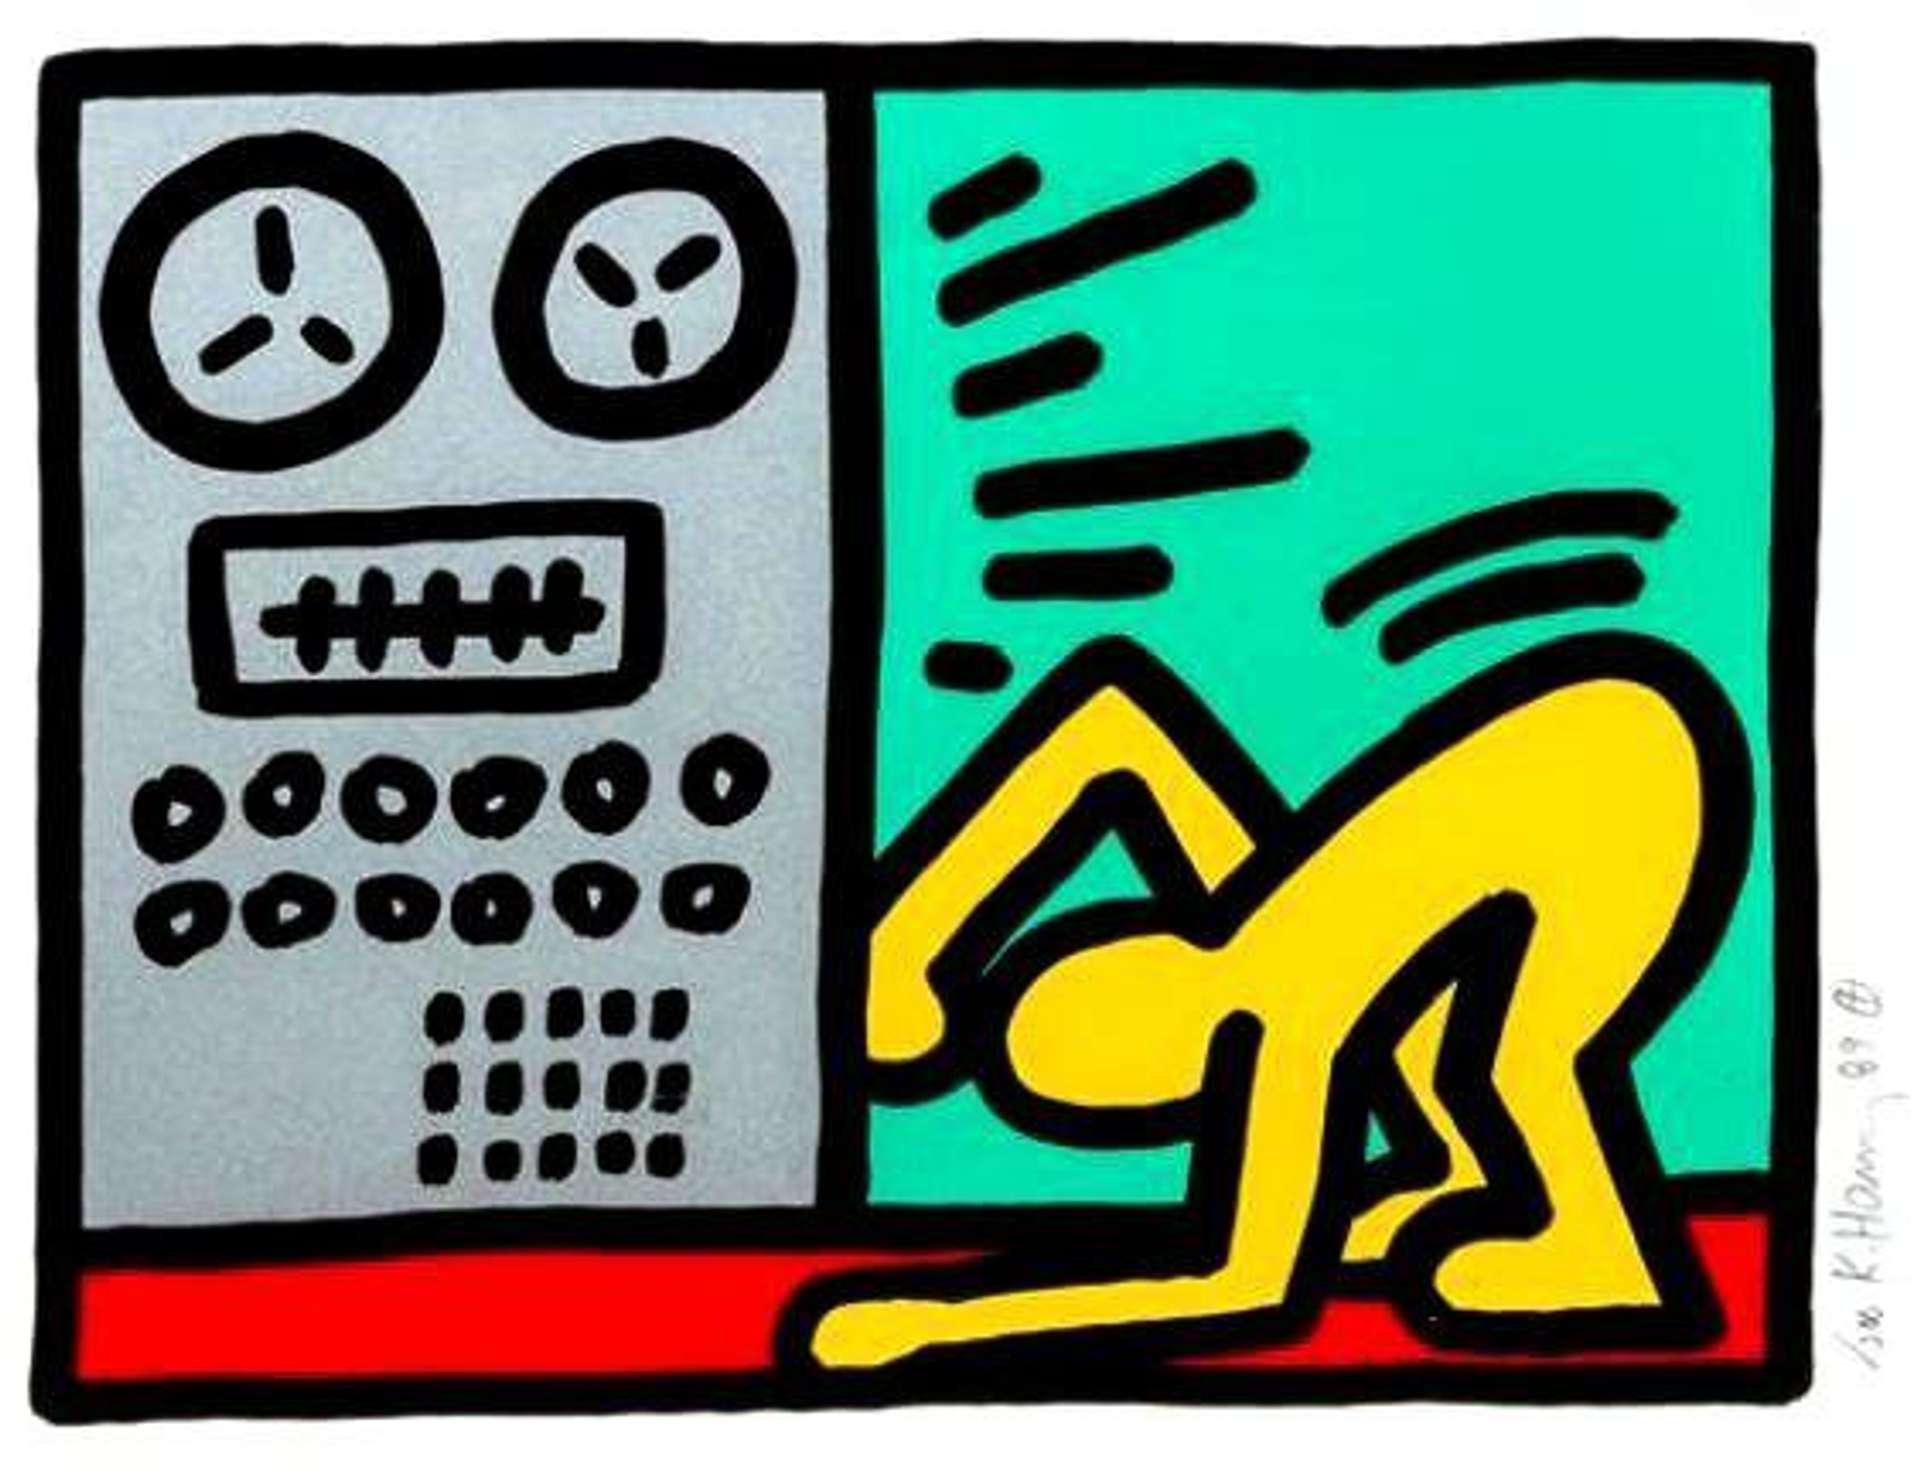 Keith Haring’s Pop Shop III, Plate IV. A yellow figure dancing while listening to music in the Pop Art style of Keith Haring